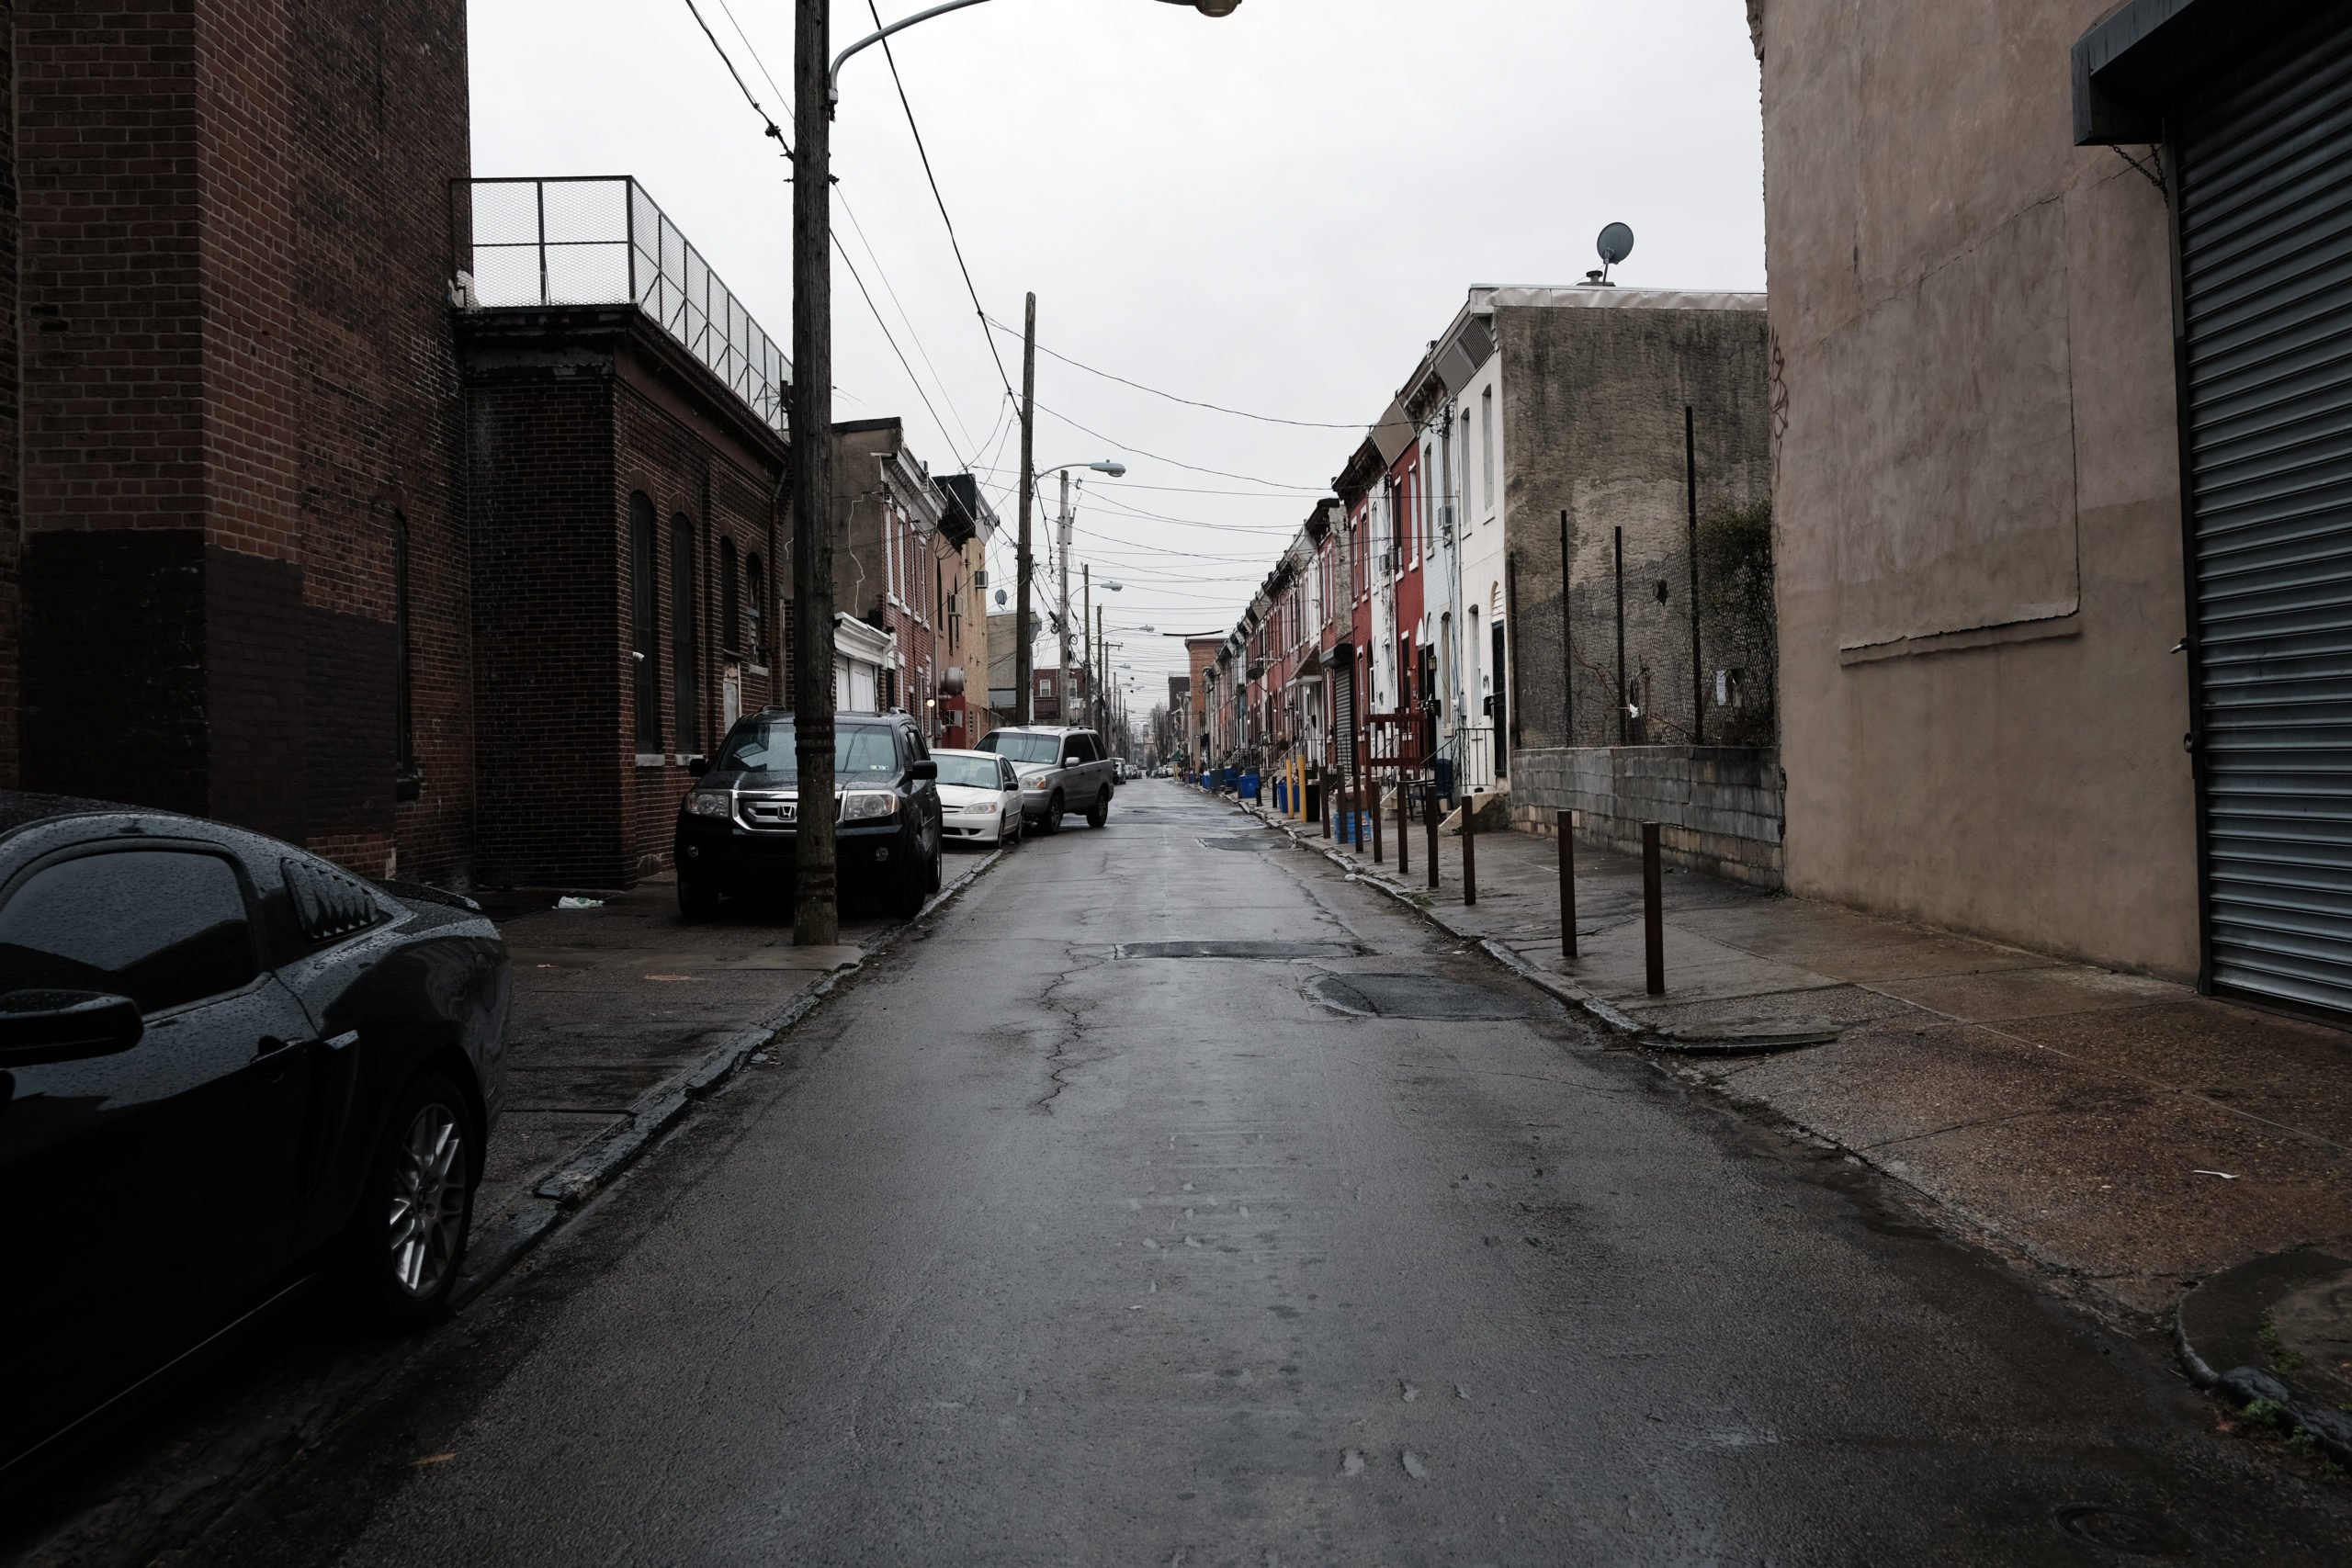 Buildings stand in a low-income neighborhood in Philadelphia, Pennsylvania. (Spencer Platt/Getty Images)